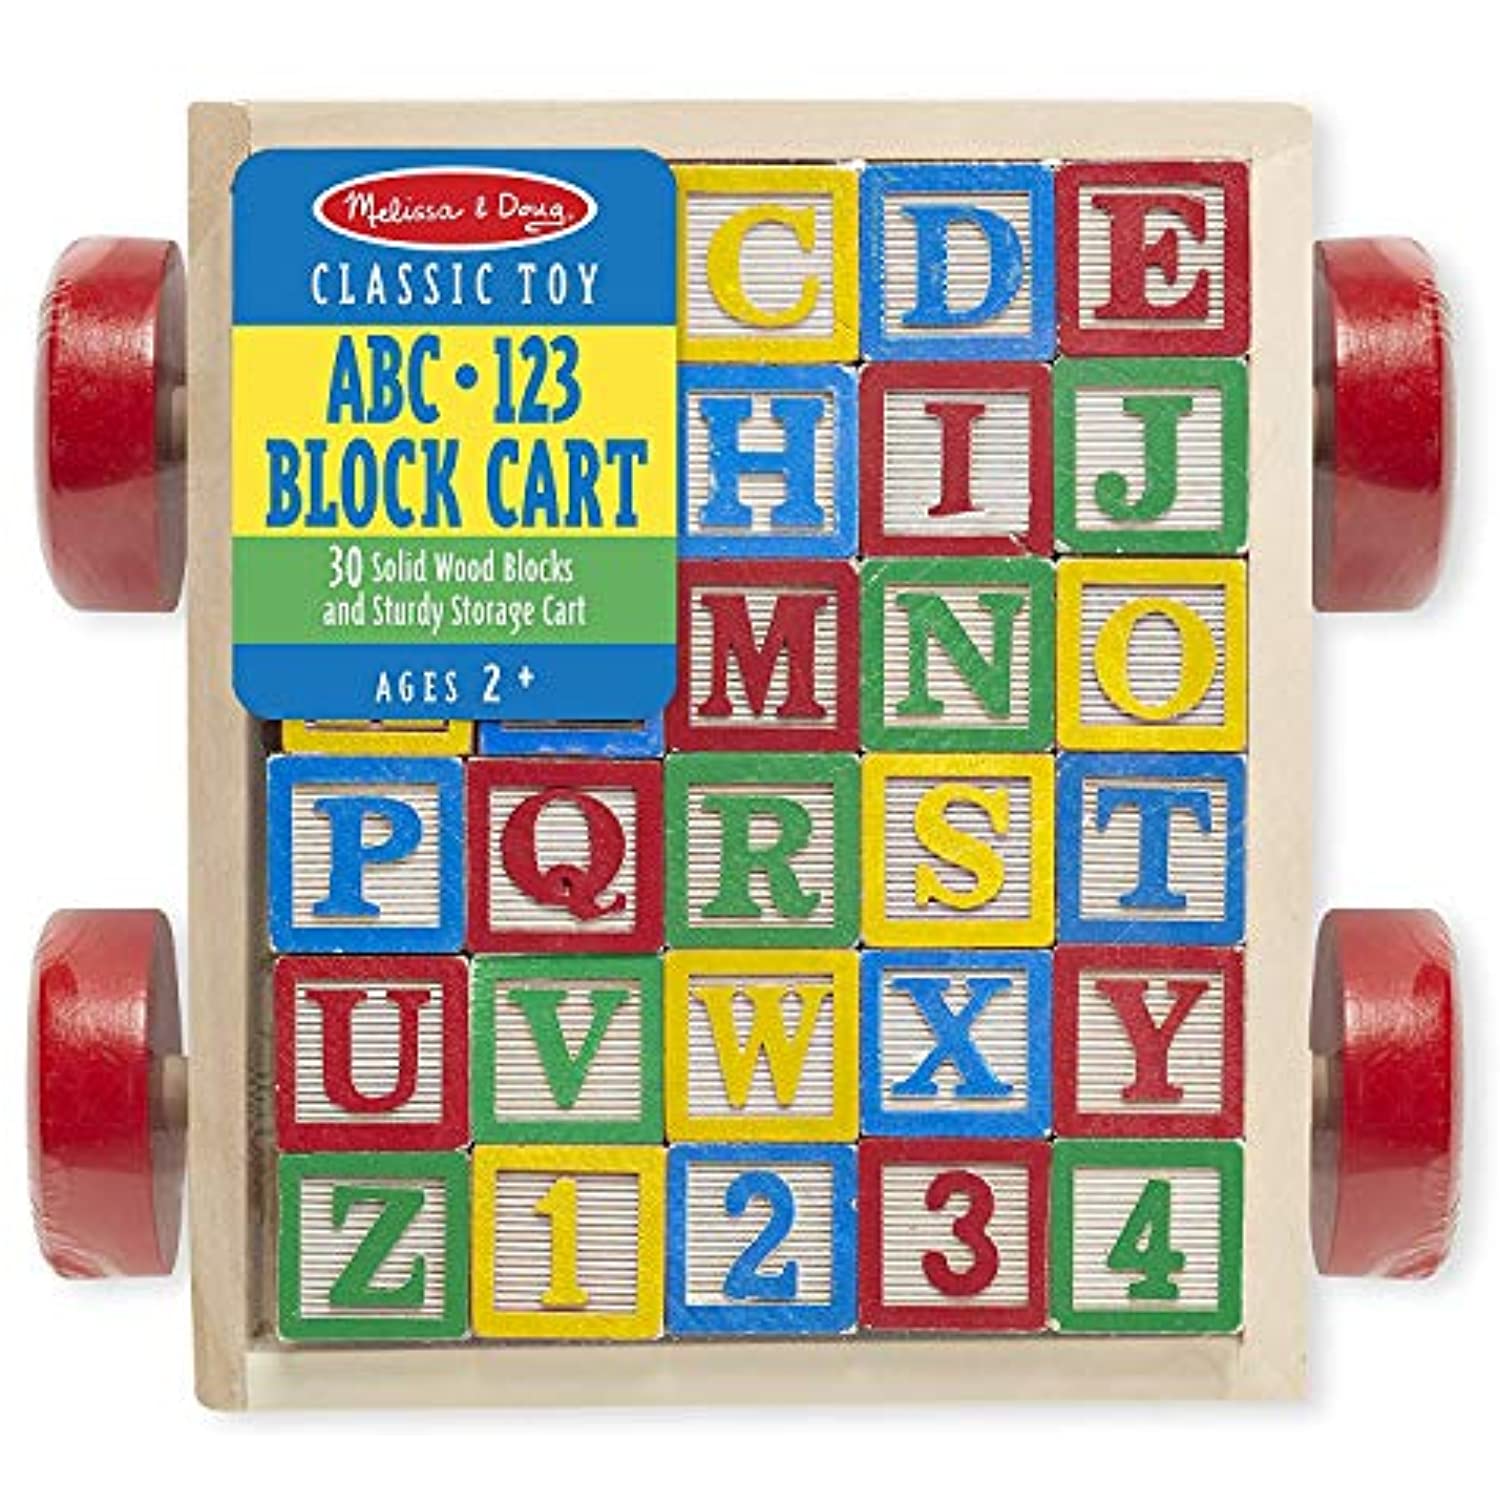 Melissa & Doug Classic ABC Wooden Block Cart Educational Toy with 30 Solid Wood Blocks with Gift Cards